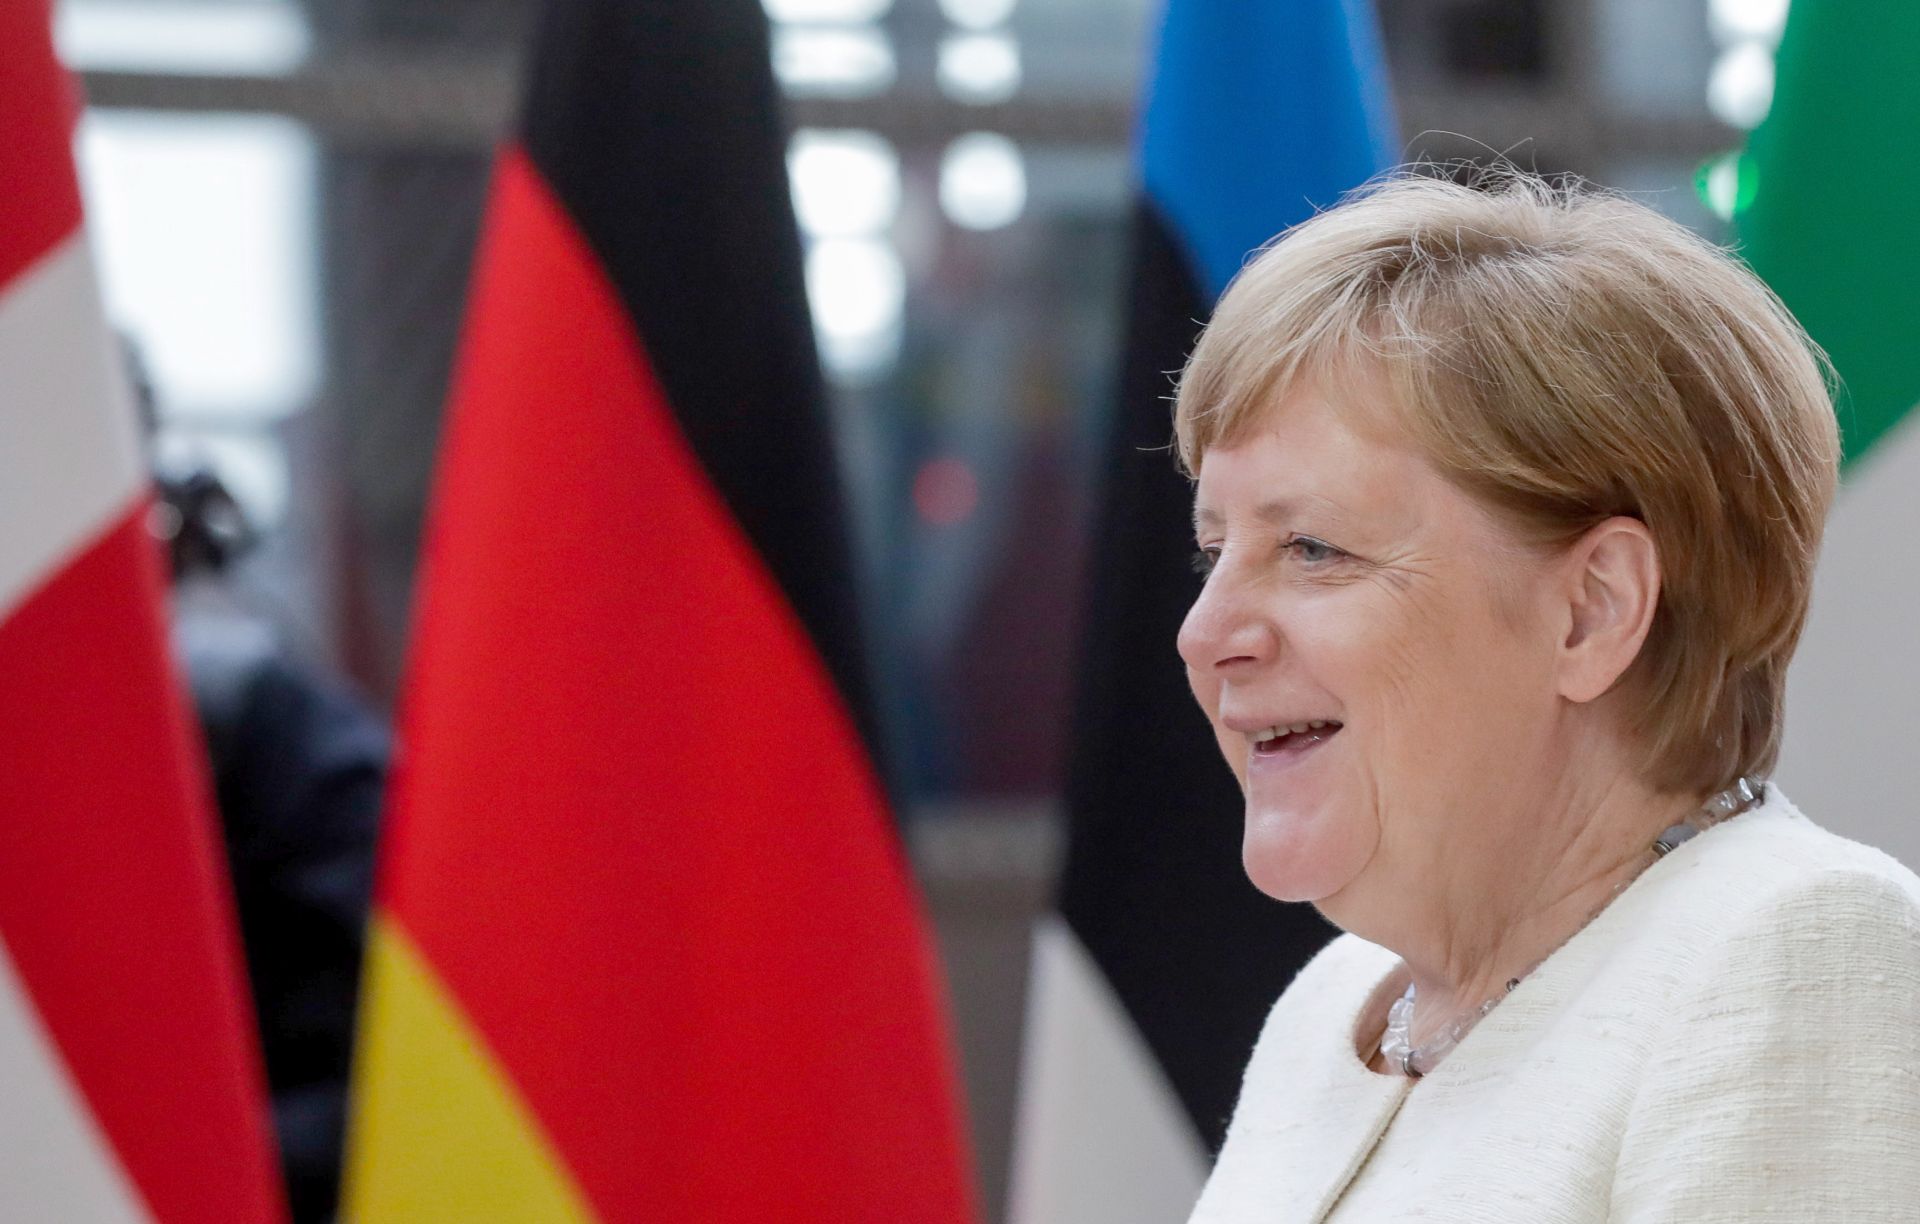 epa07660013 German Chancellor Angela Merkel arrives for a European Council Summit in Brussels, Belgium, 20 June 2019. European leaders are meeting in Brussels on 20 and 21 June to discuss new leadership posts for the EU's next institutional cycle and adopt the bloc's strategic agenda for 2019-2024; they will also focus on climate, disinformation, long-term EU budget and external relations.  EPA/STEPHANIE LECOCQ